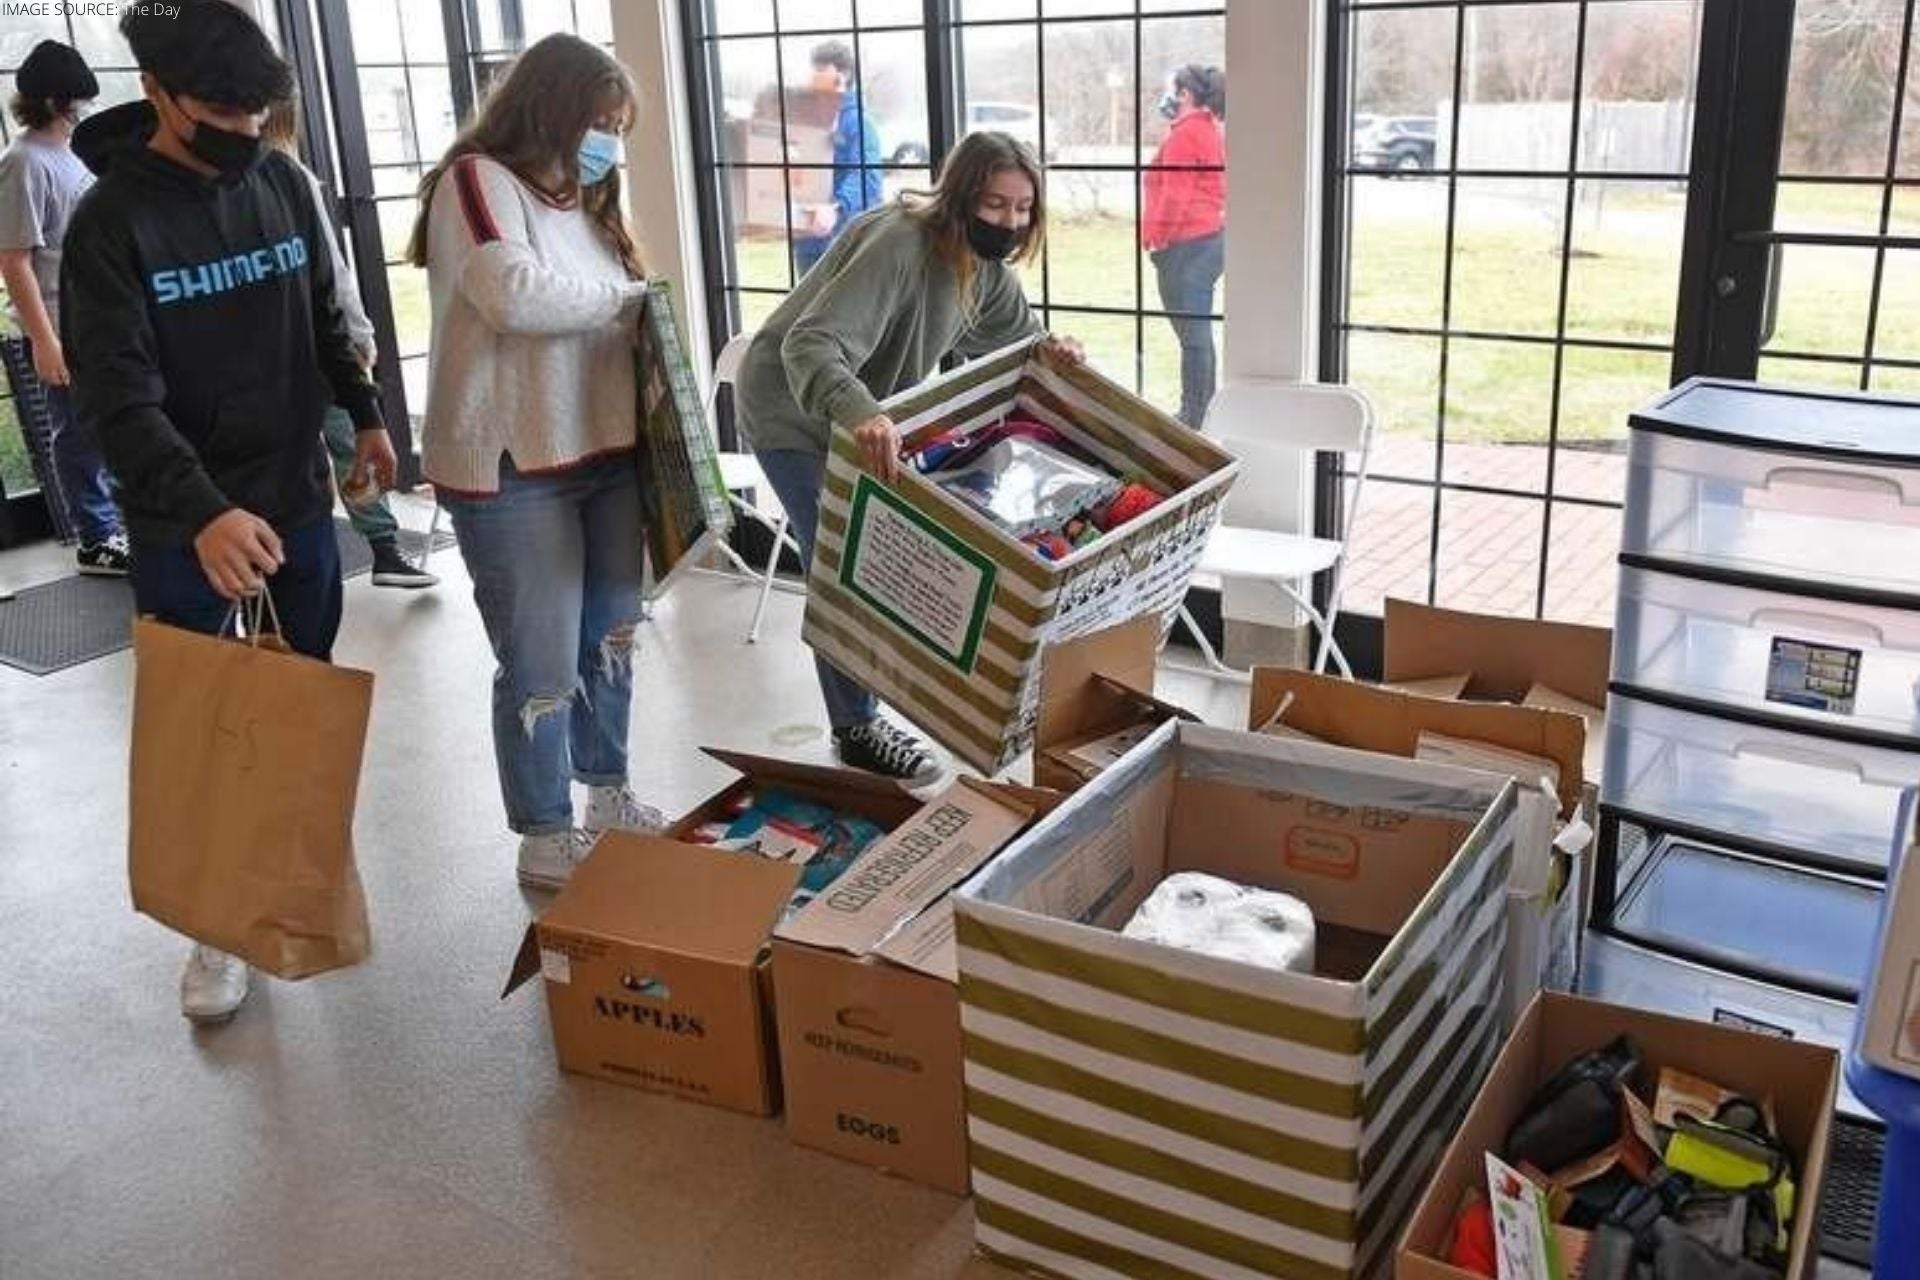 Students from Waterford High School Manage to Donate Over 1200 Items to Animal Shelters